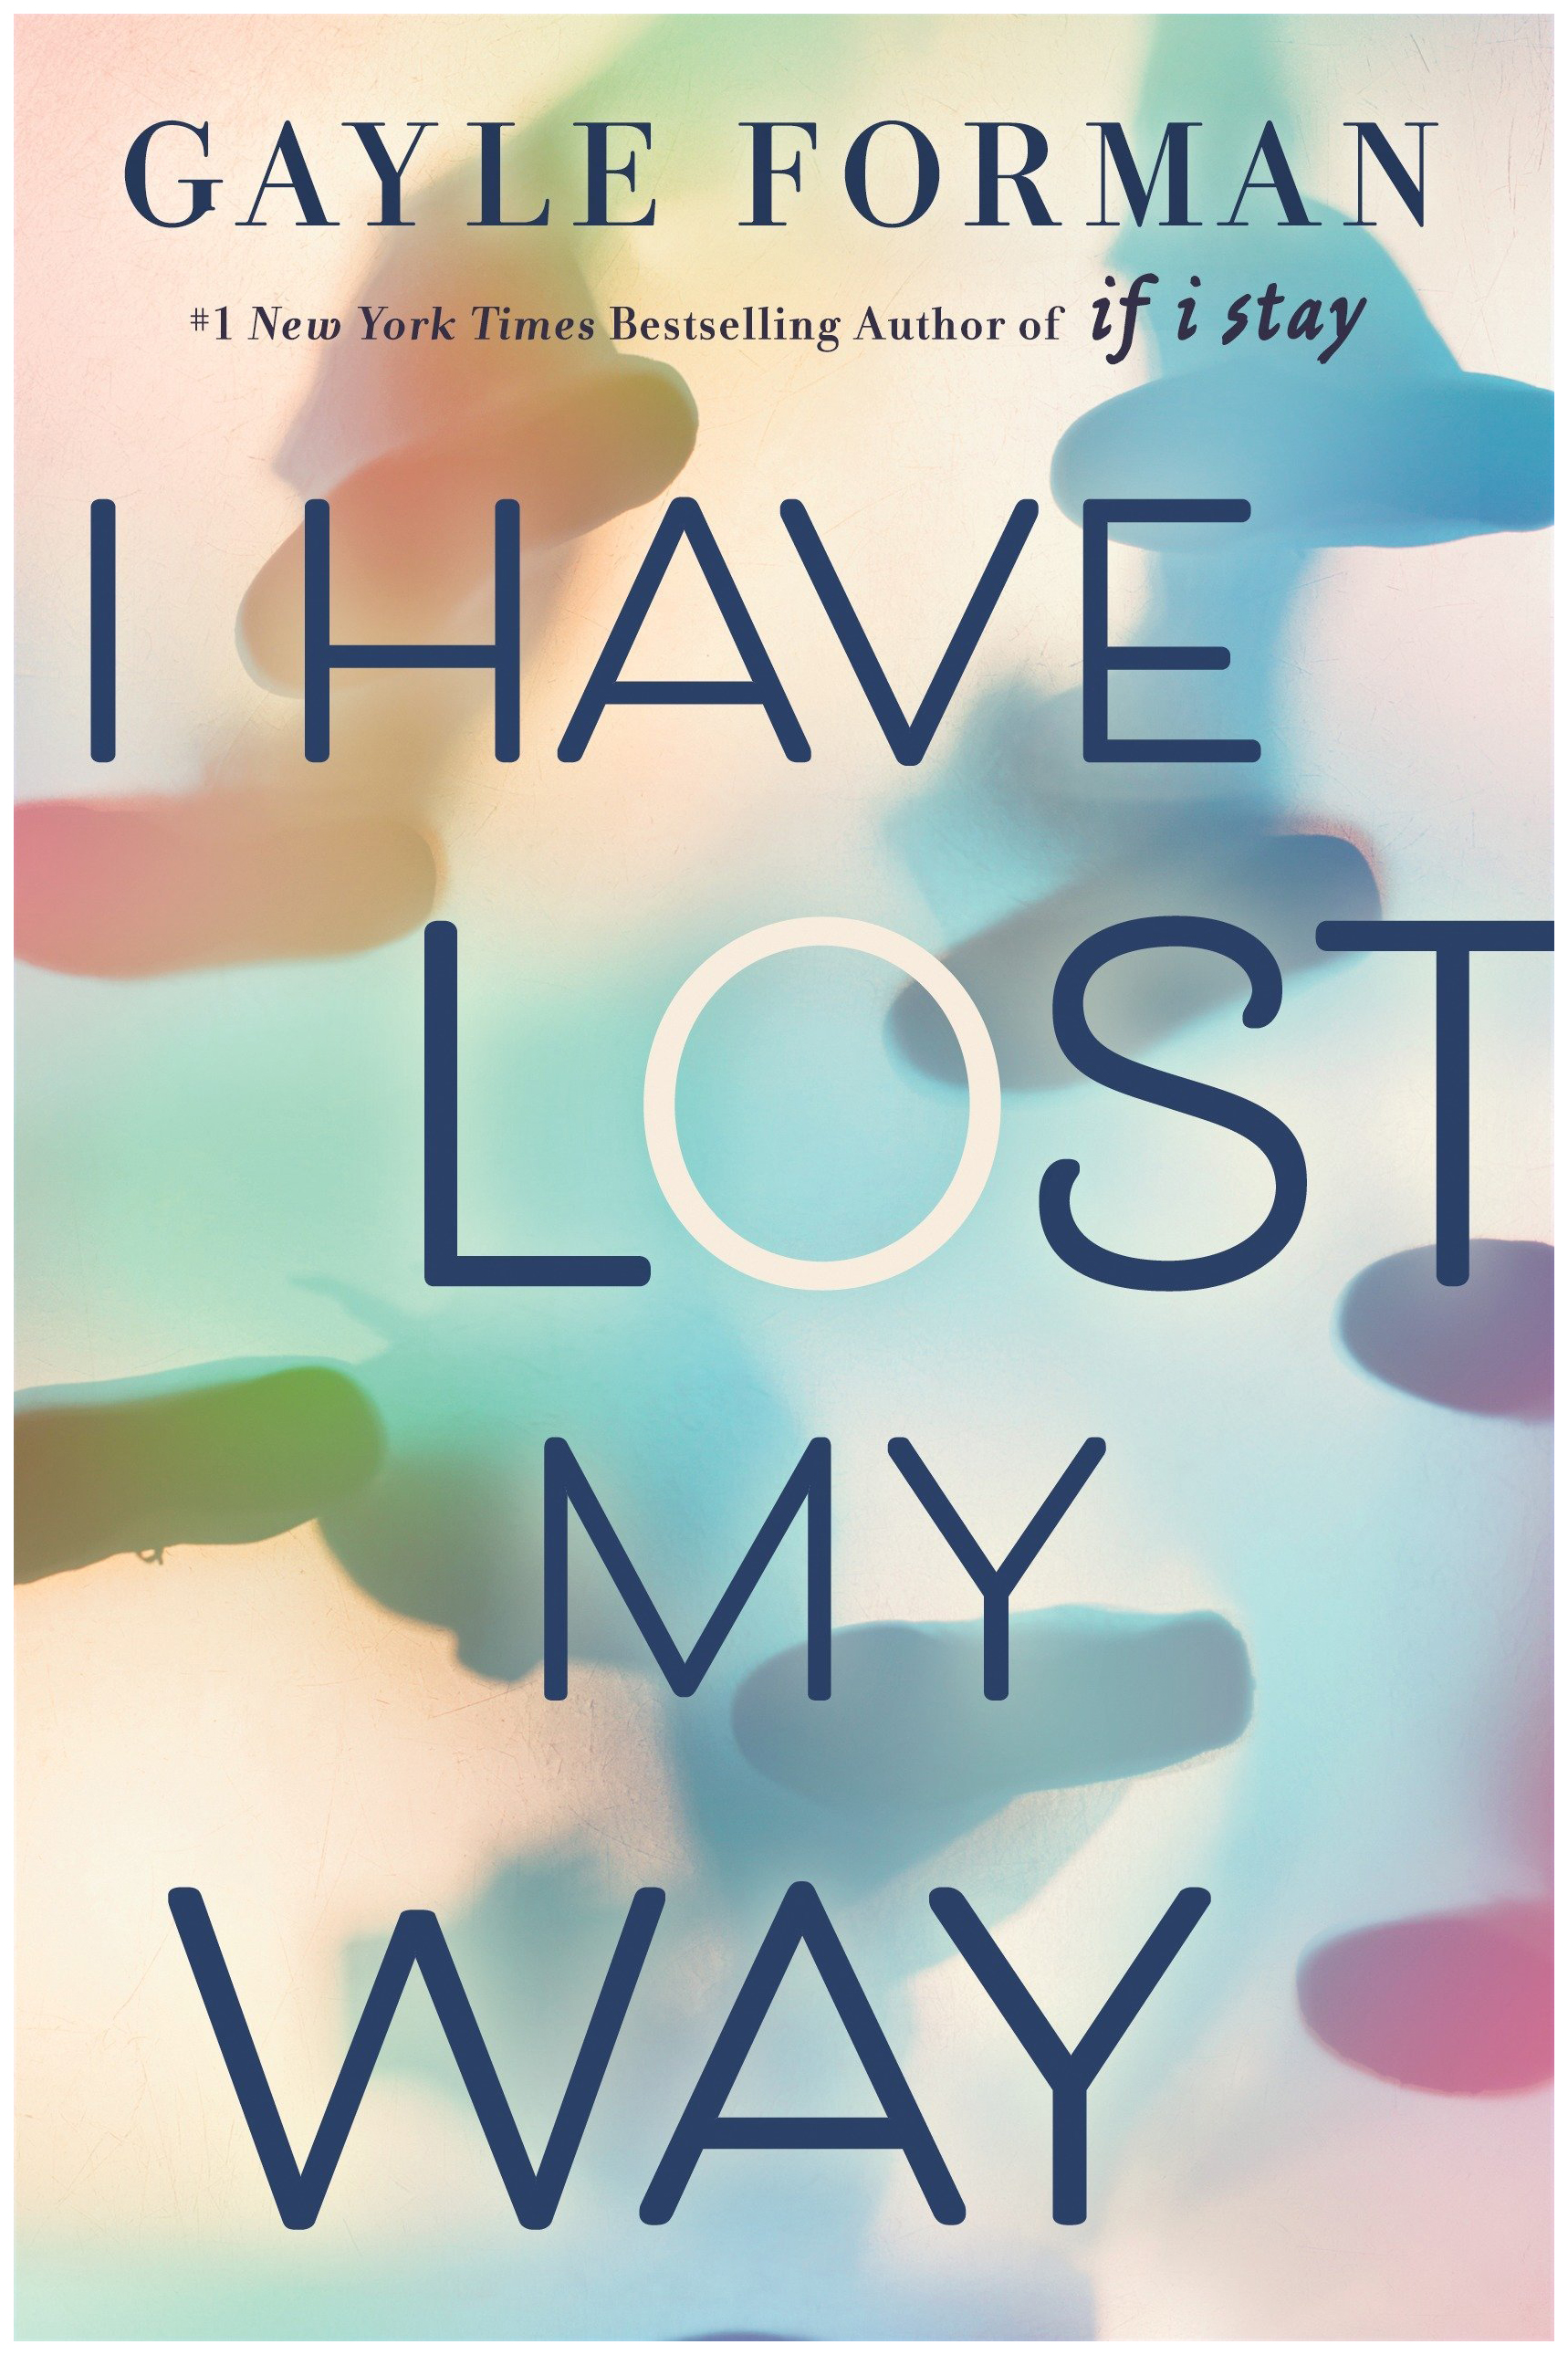 фото Книга penguin group gayle forman "i have lost my way"